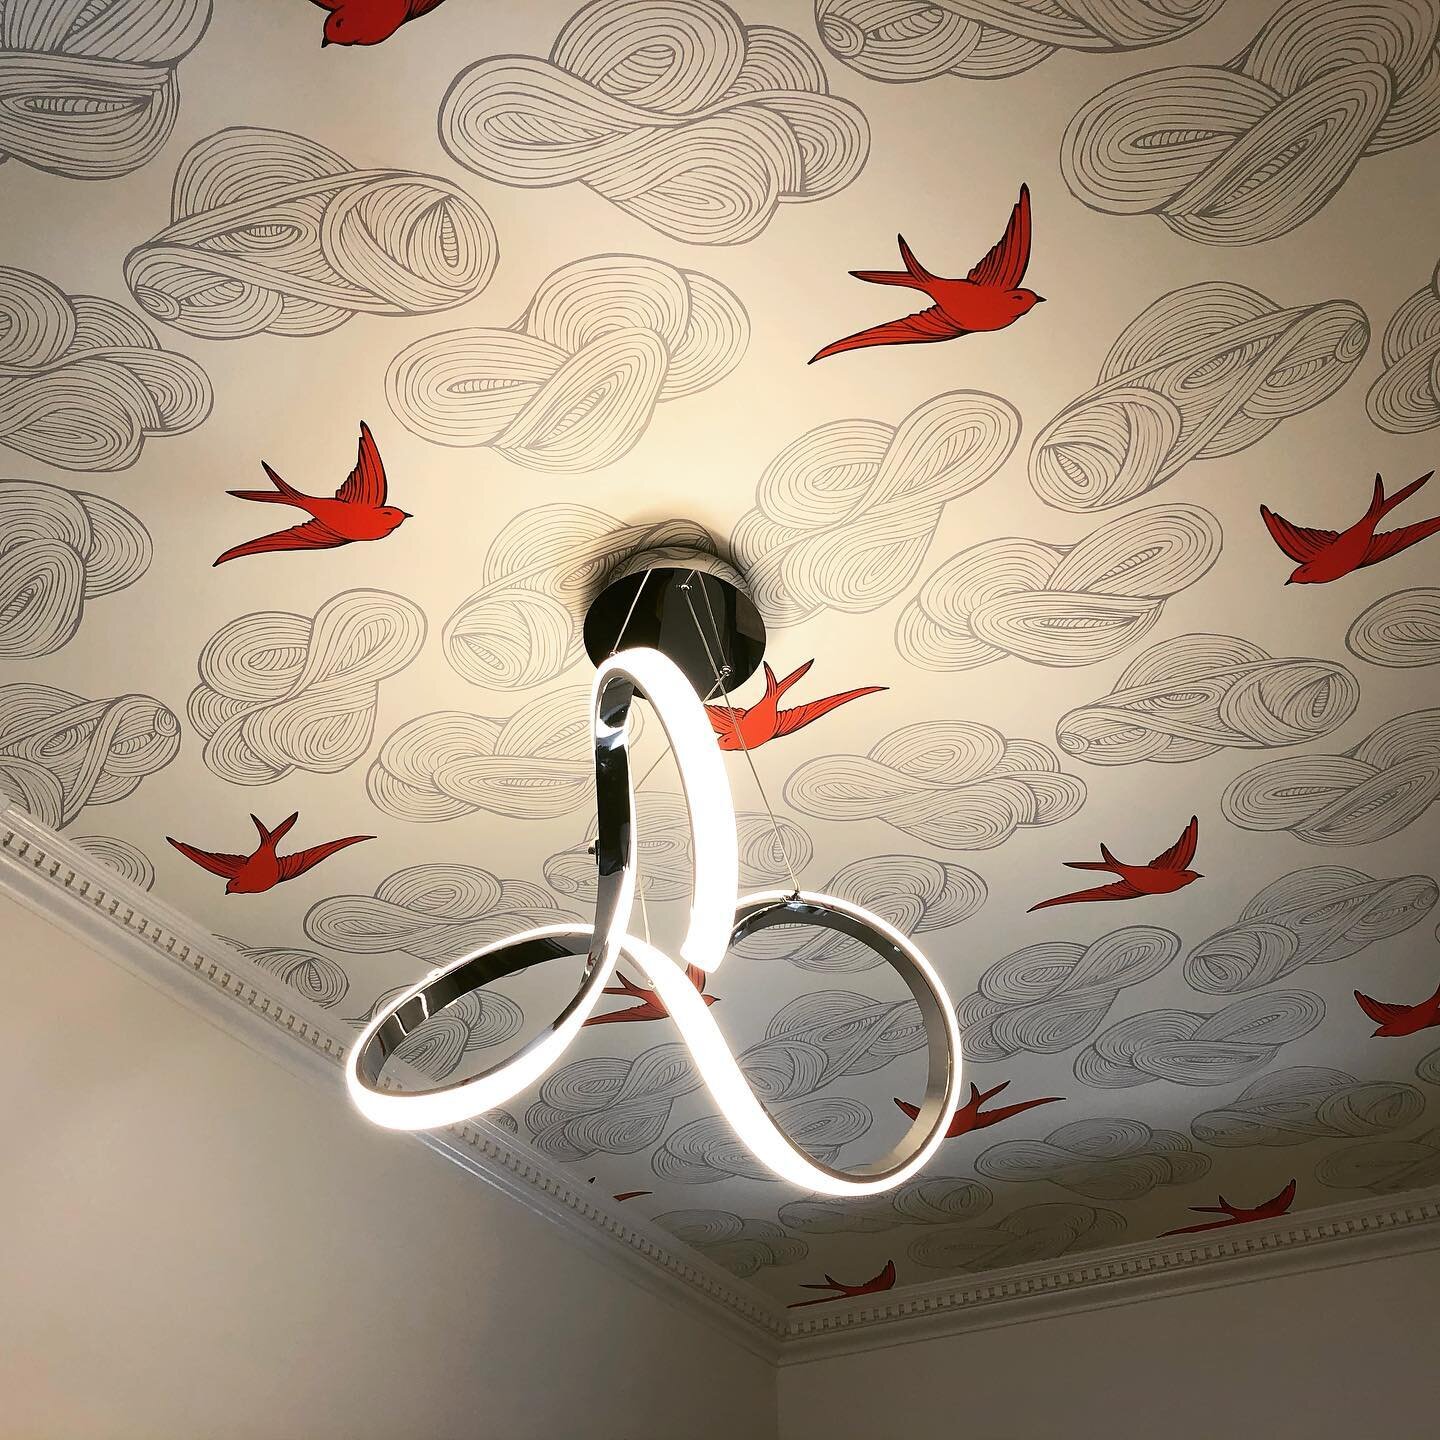 Welcome to my home! The ceiling in the foyer pulls the good &ldquo;chi&rdquo; or energy up - and the birds and light fixture help to spread the good chi through the house. 
 
#fengshui #fengshuilifestyle #fengshuitips #design #designinspiration #hygg